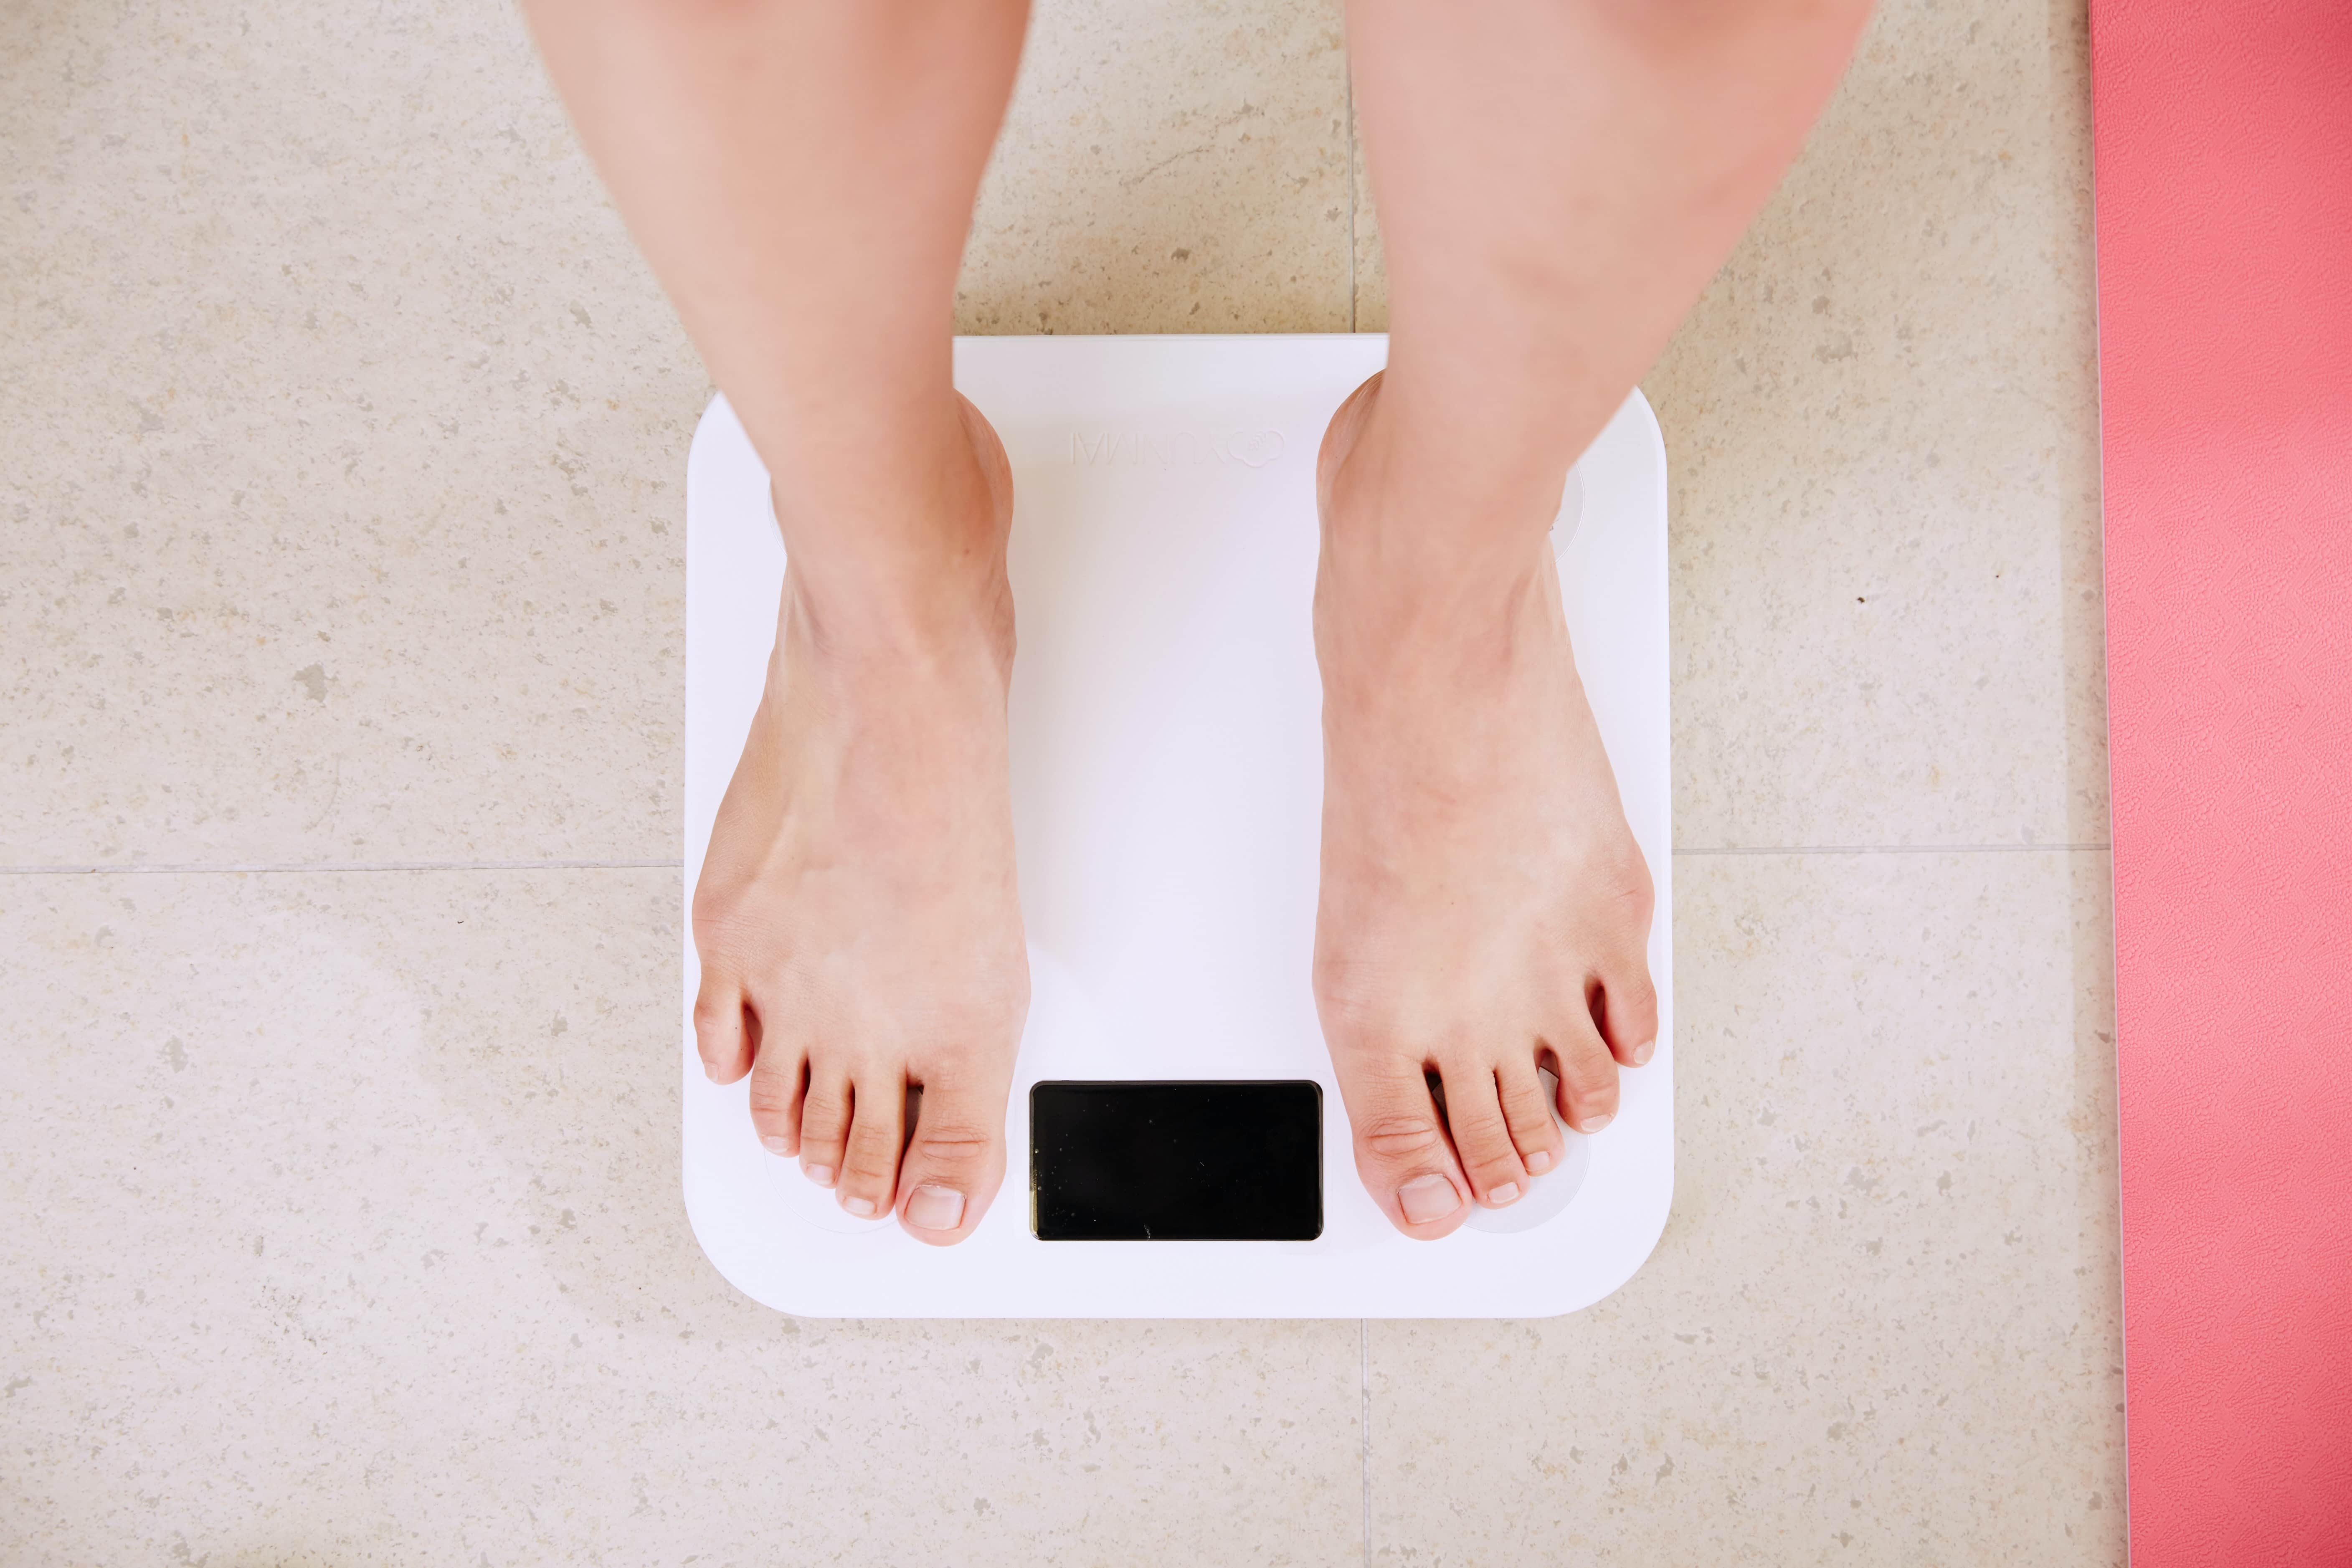 hypnosis for weight loss toronto